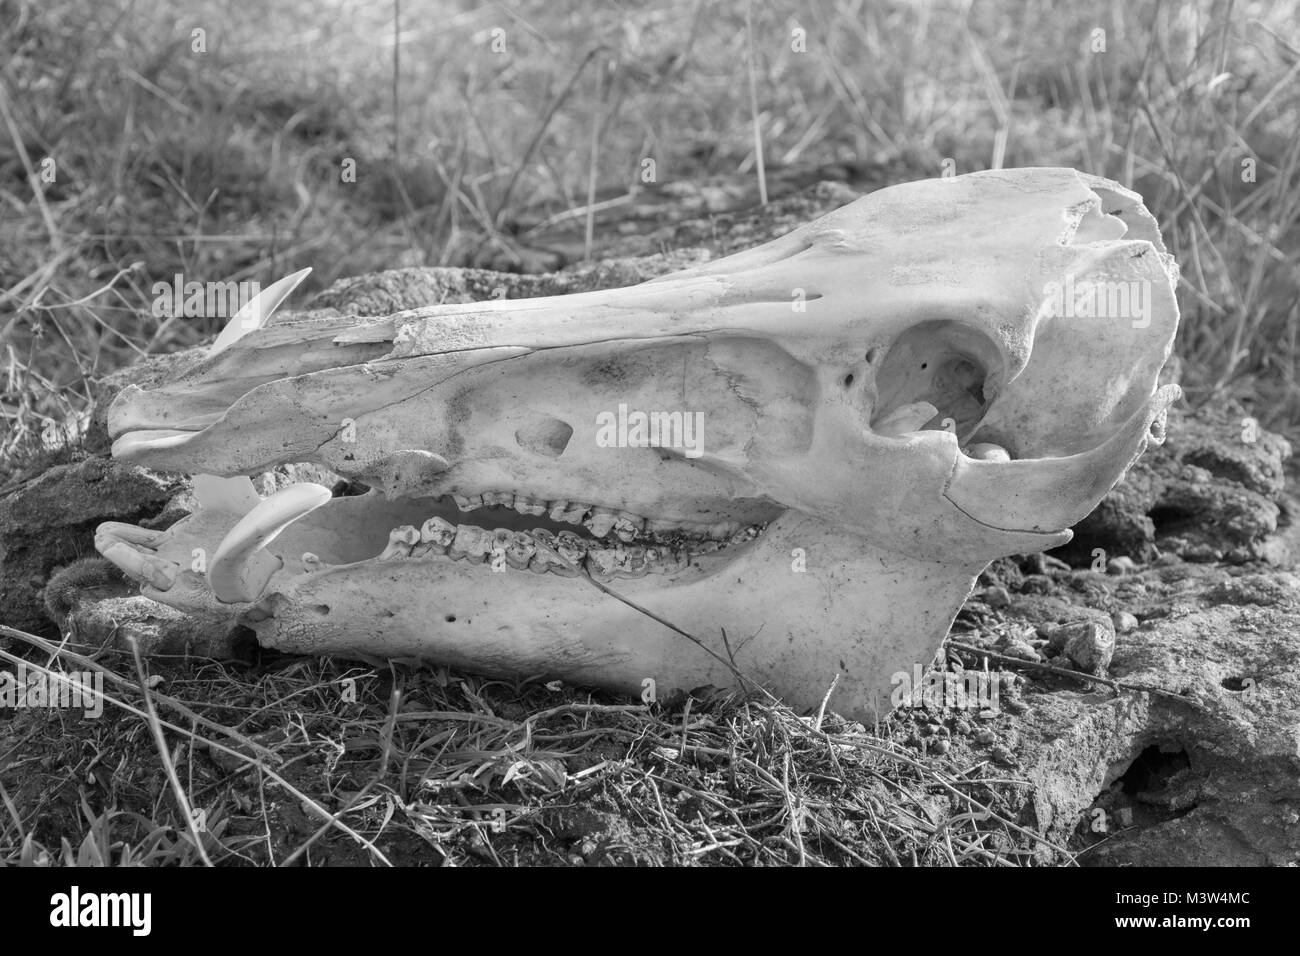 Skull of wild boar on dry grass background, side view close-up, black and white photo Stock Photo